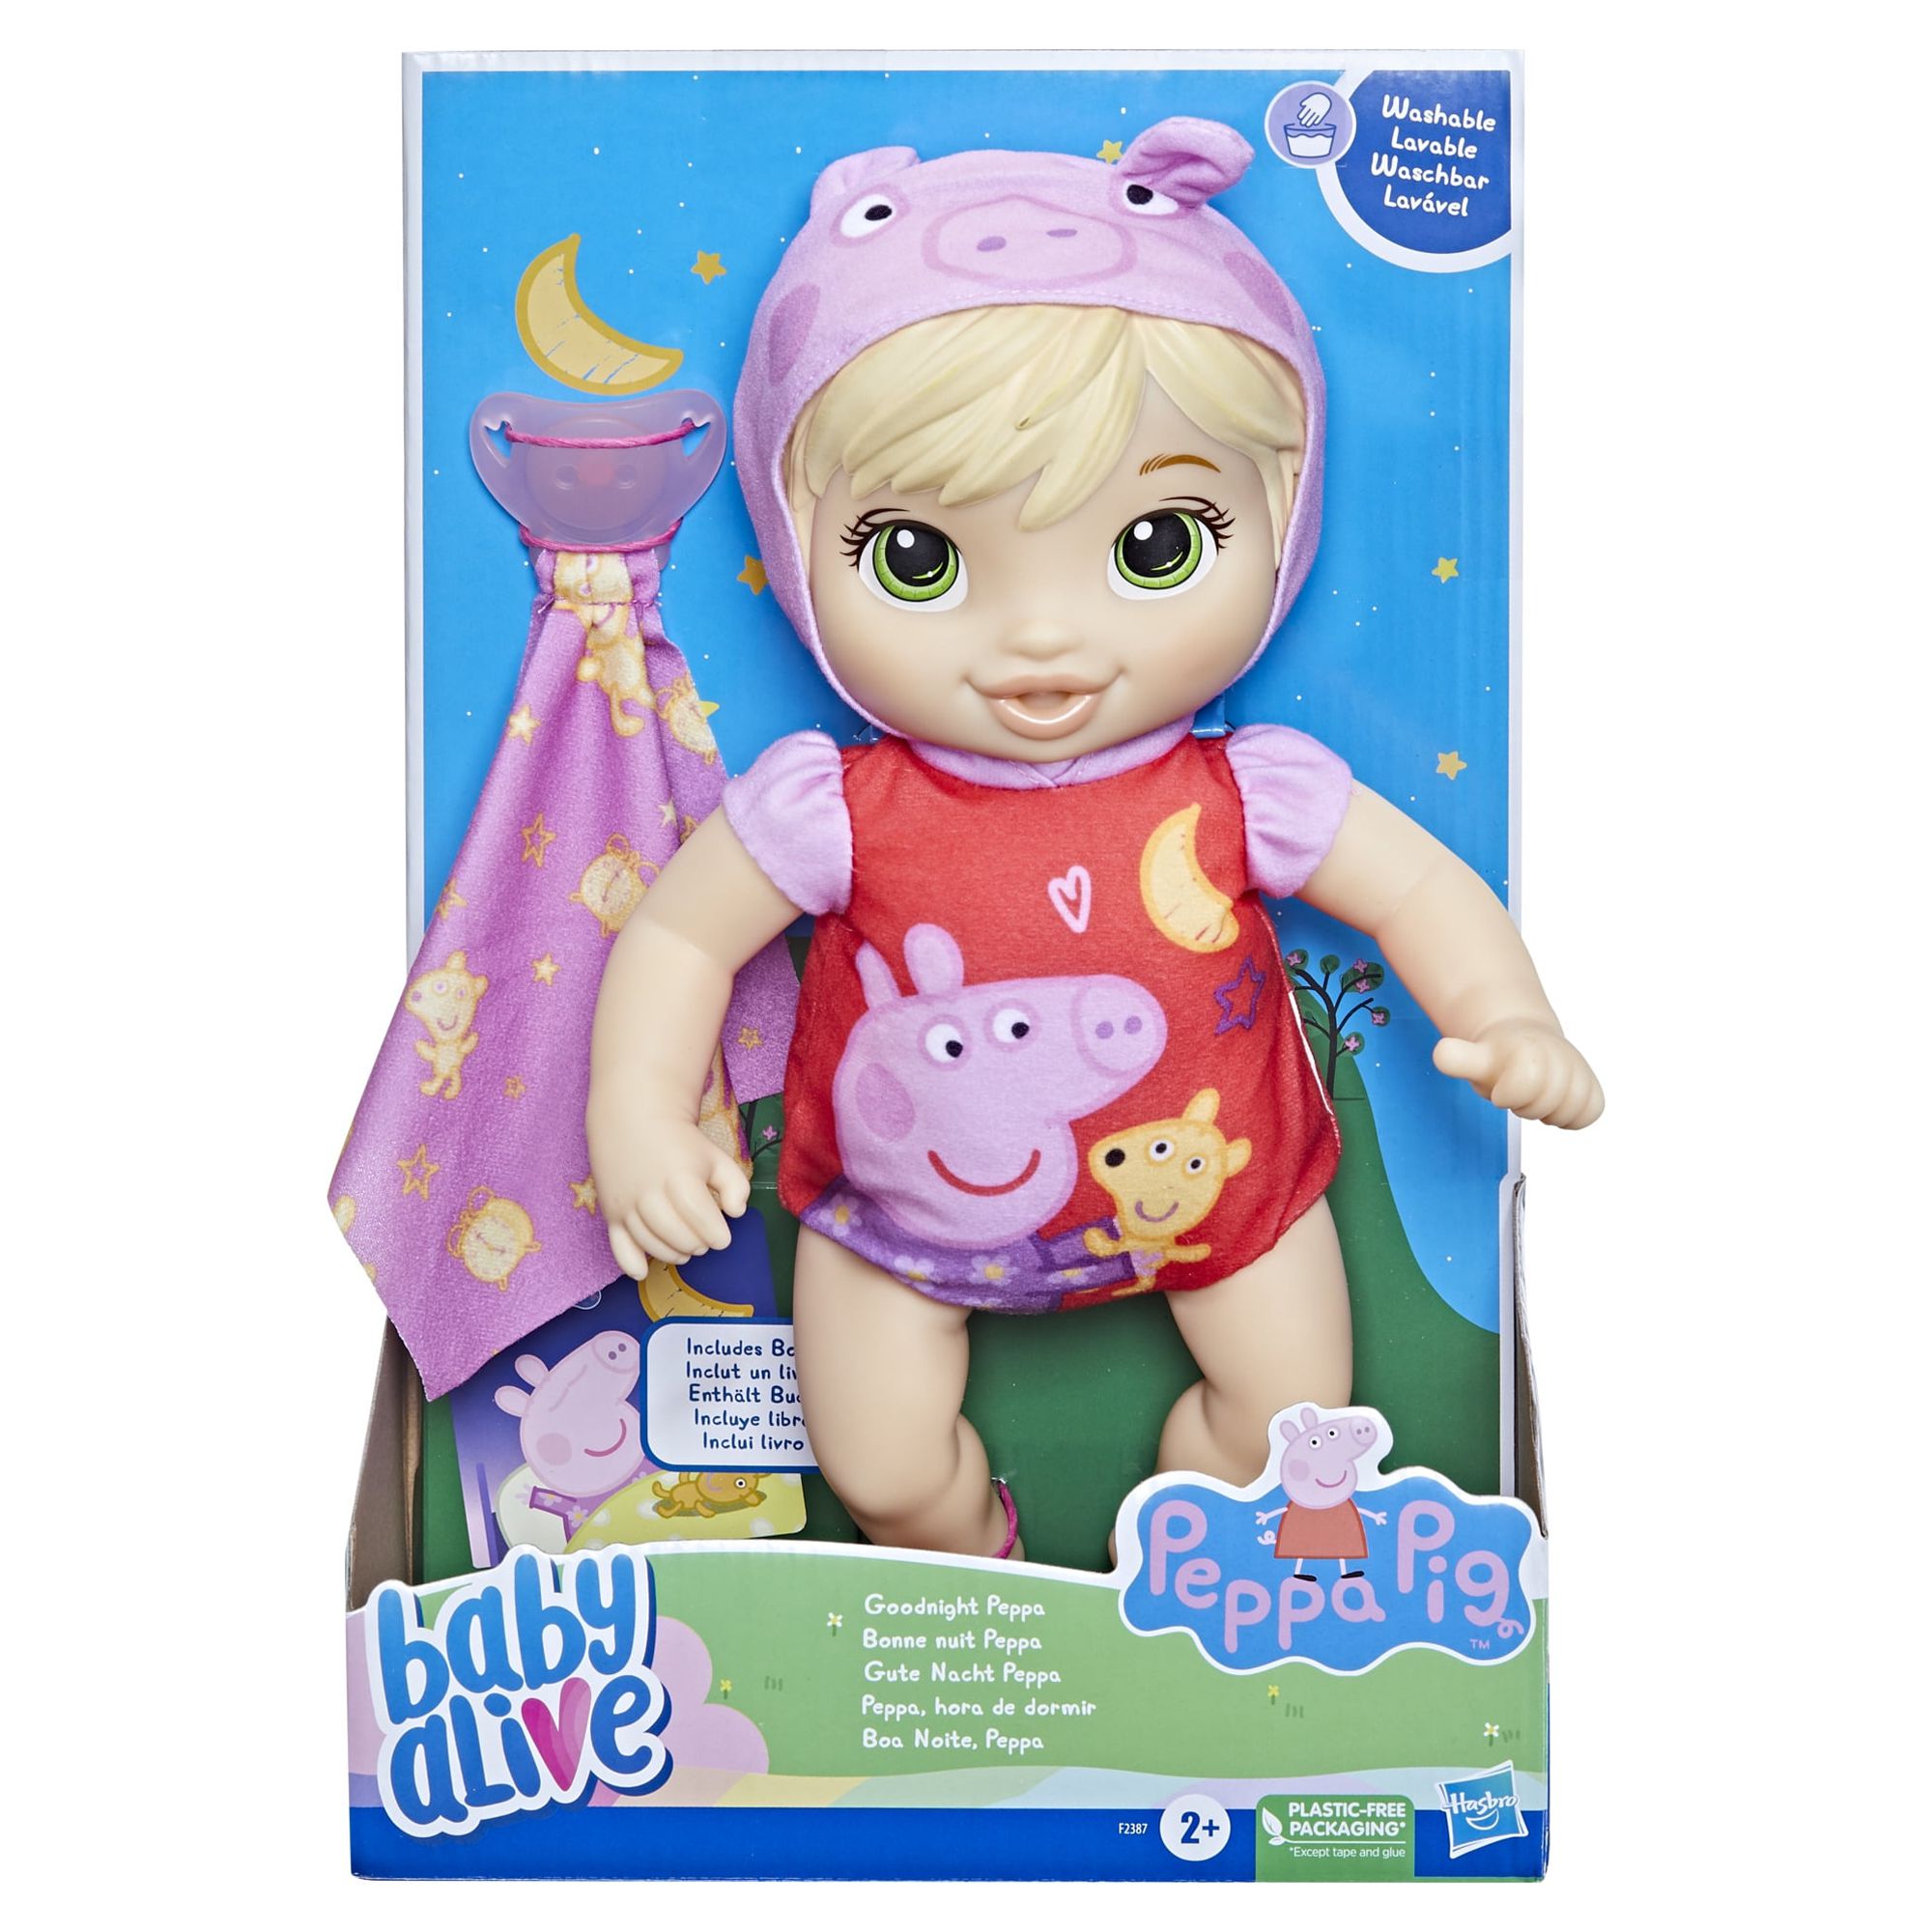 Baby Alive Goodnight Peppa Doll, Peppa Pig Toy, Blonde Hair, Only At Walmart - image 5 of 6